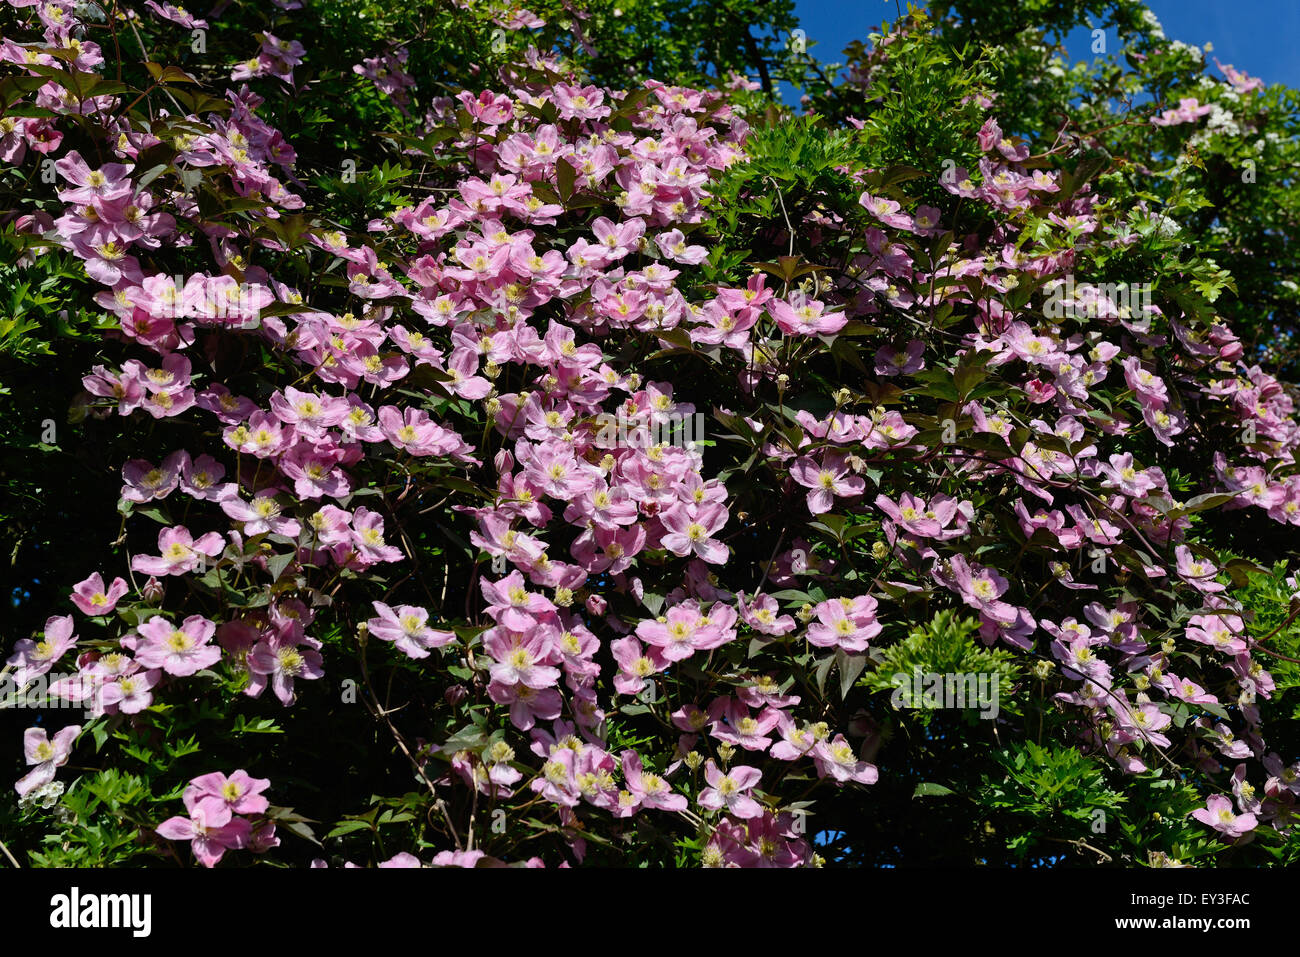 Ornamental climber Clematis montana climbing through a large hawthorn tree now draped in pink flowers, Berkshire, May Stock Photo